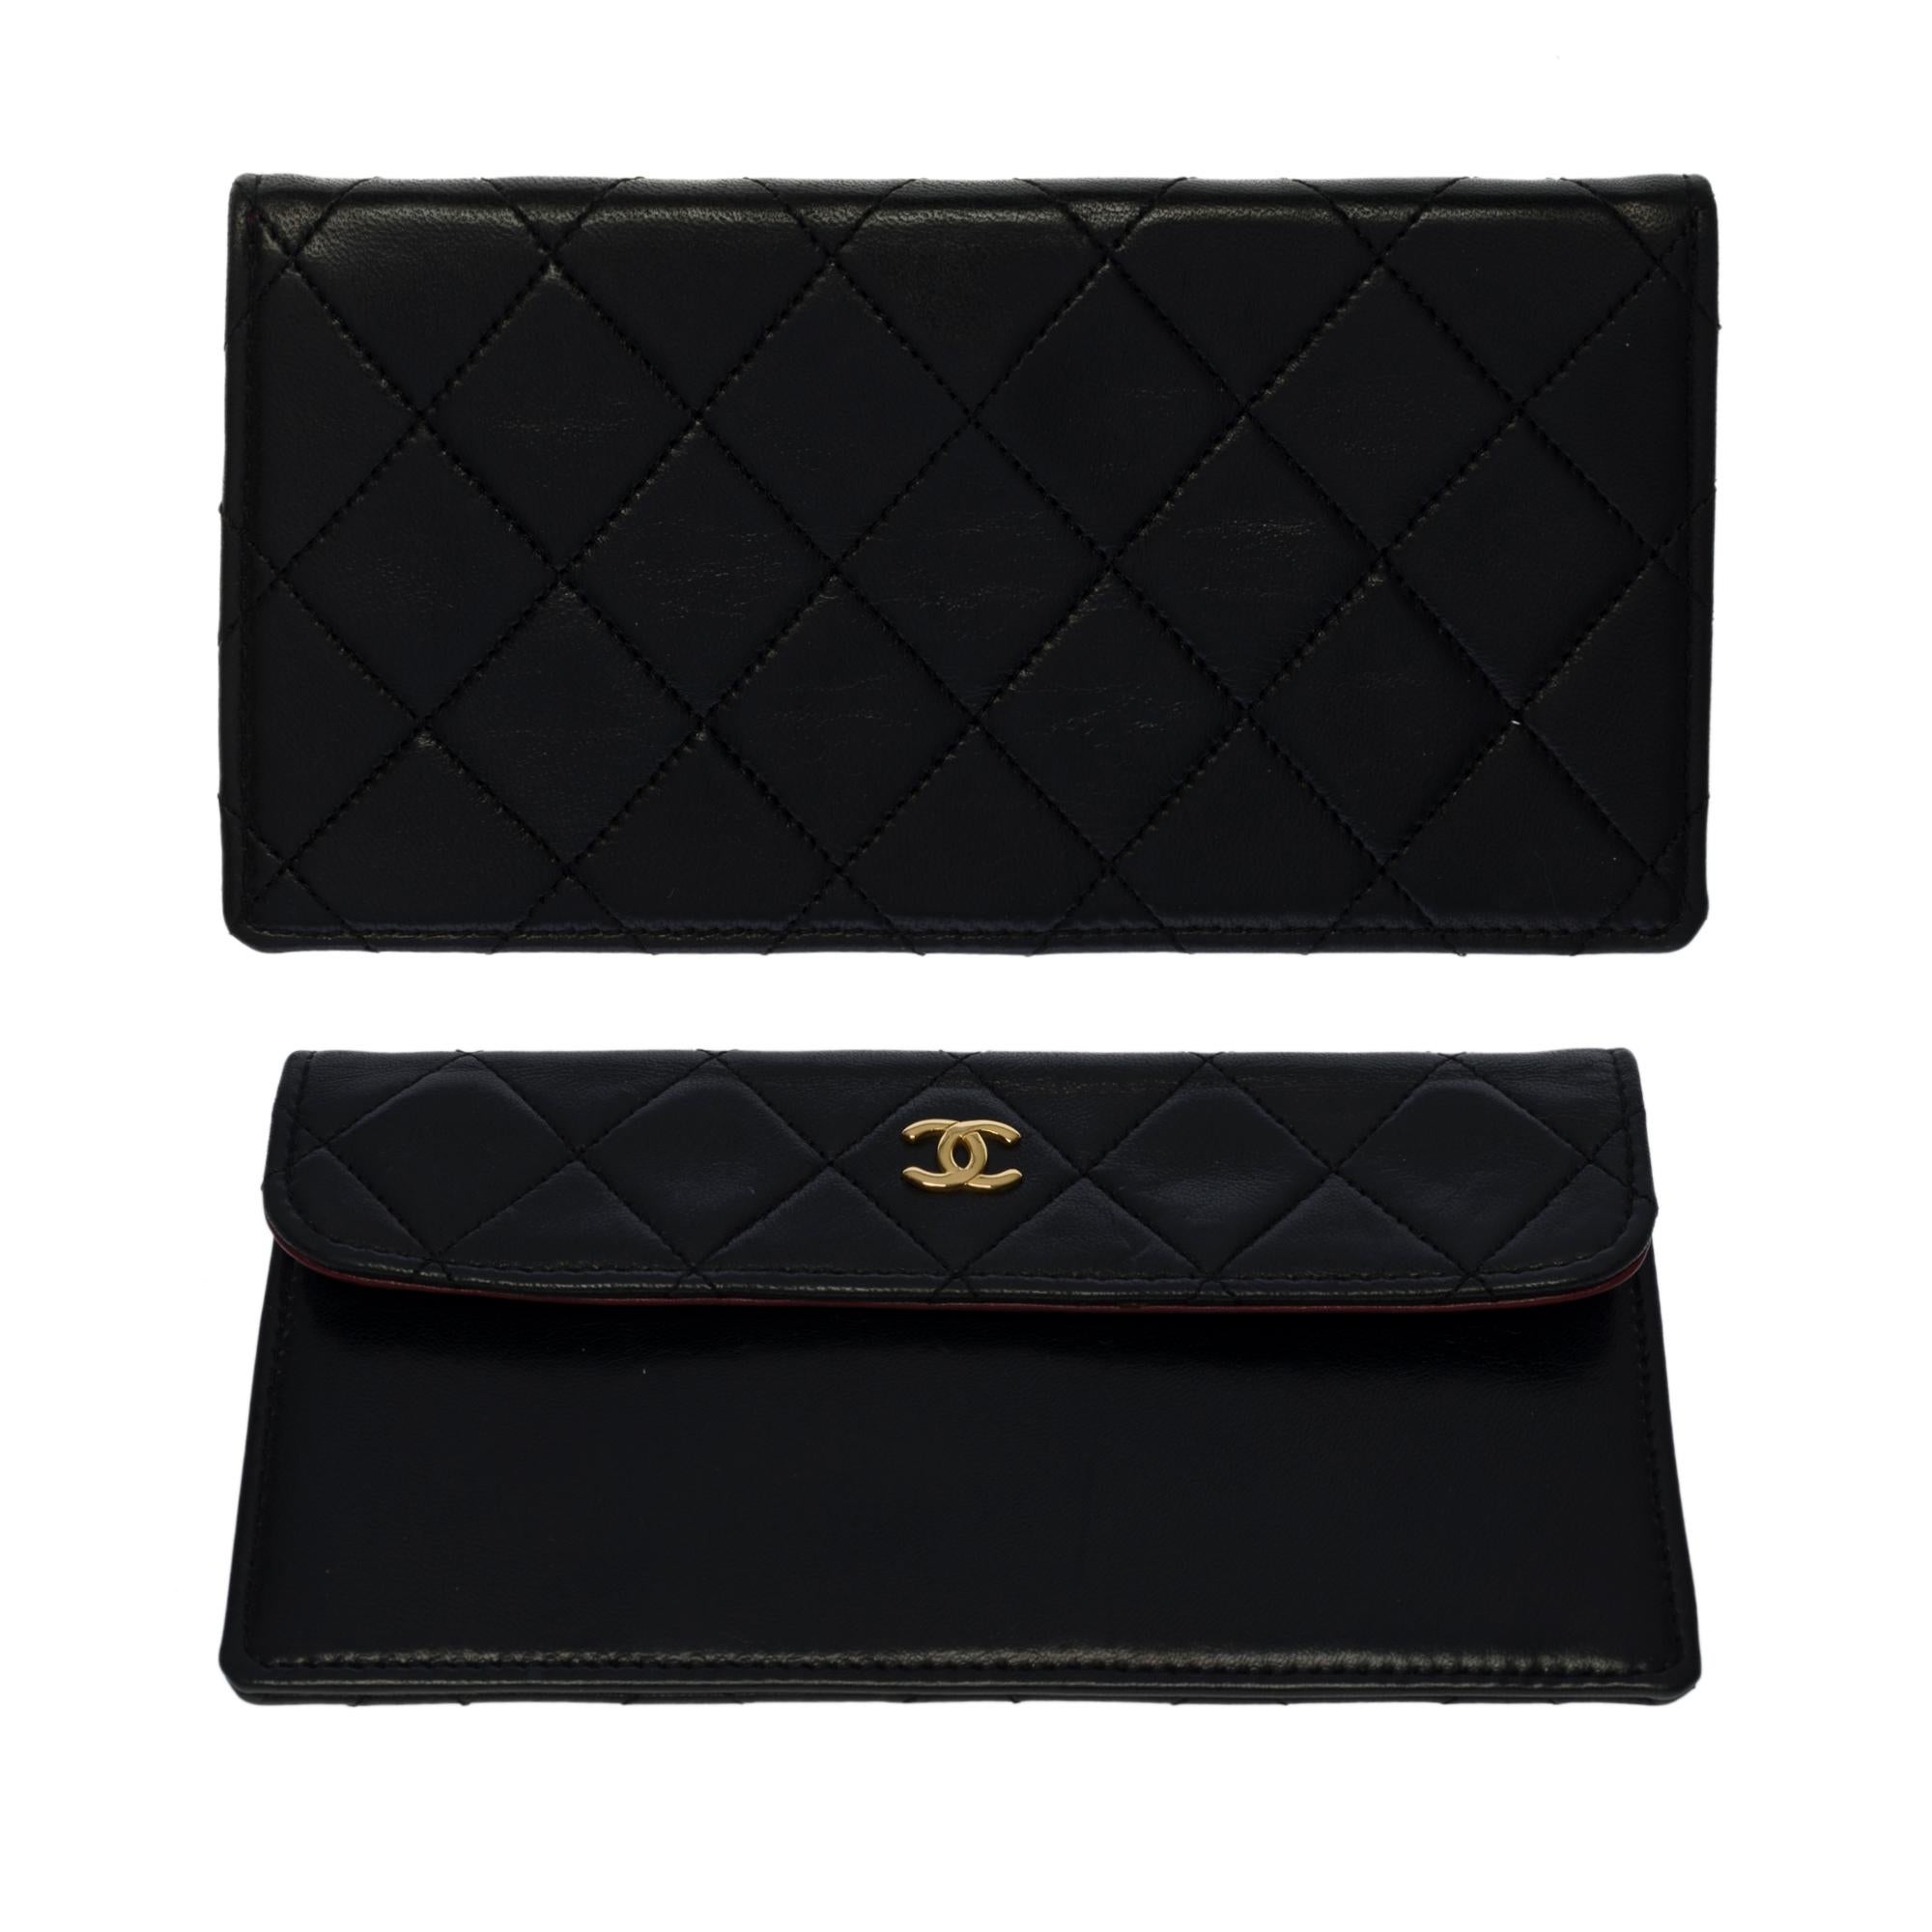 Rare Chanel Classic Flap shoulder bag in black quilted lambskin with Pouch, GHW 11